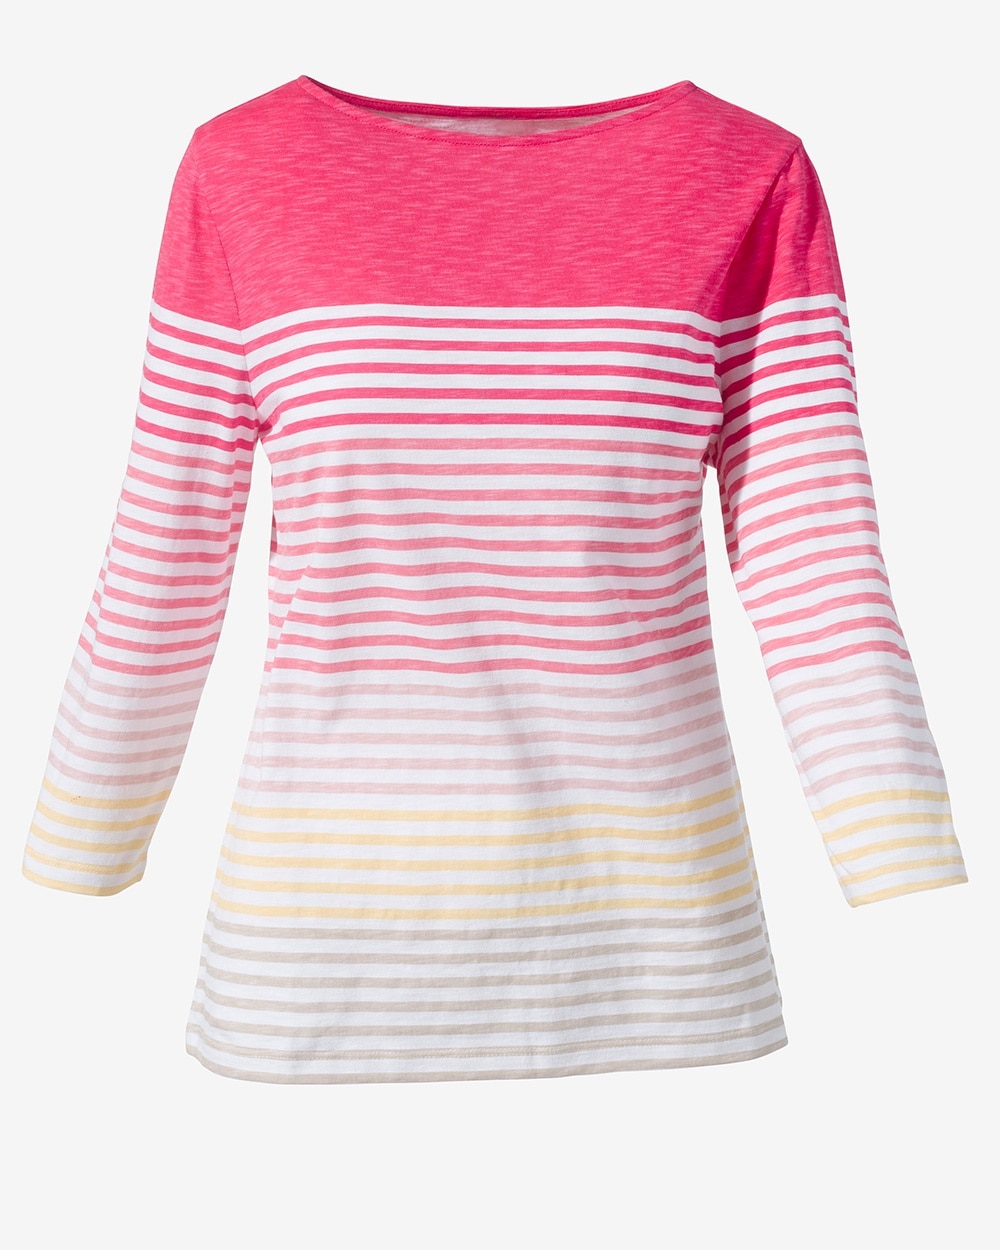 Prism Rays Boat-Neck 3/4-Sleeve Top